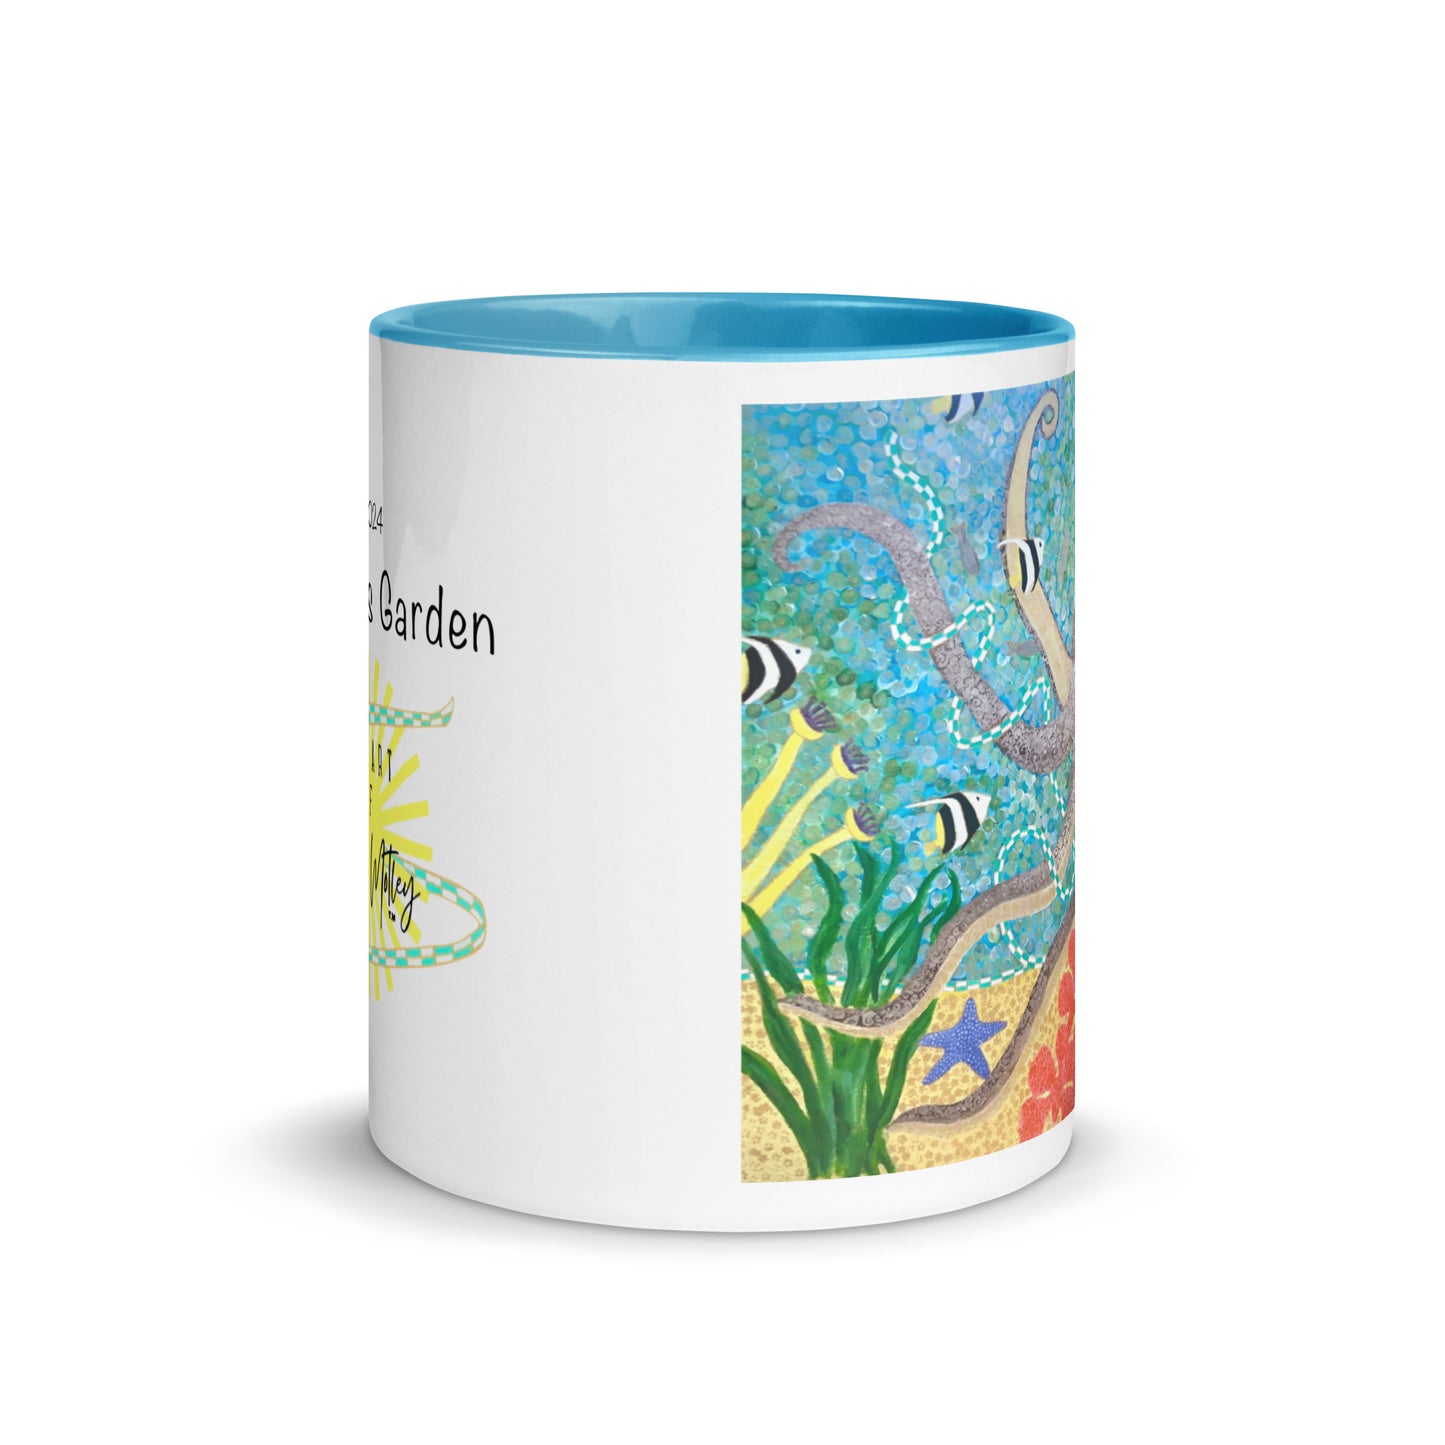 Octopus's Garden Mug with Color Inside (RIBBON OF LOVE COLLECTION)